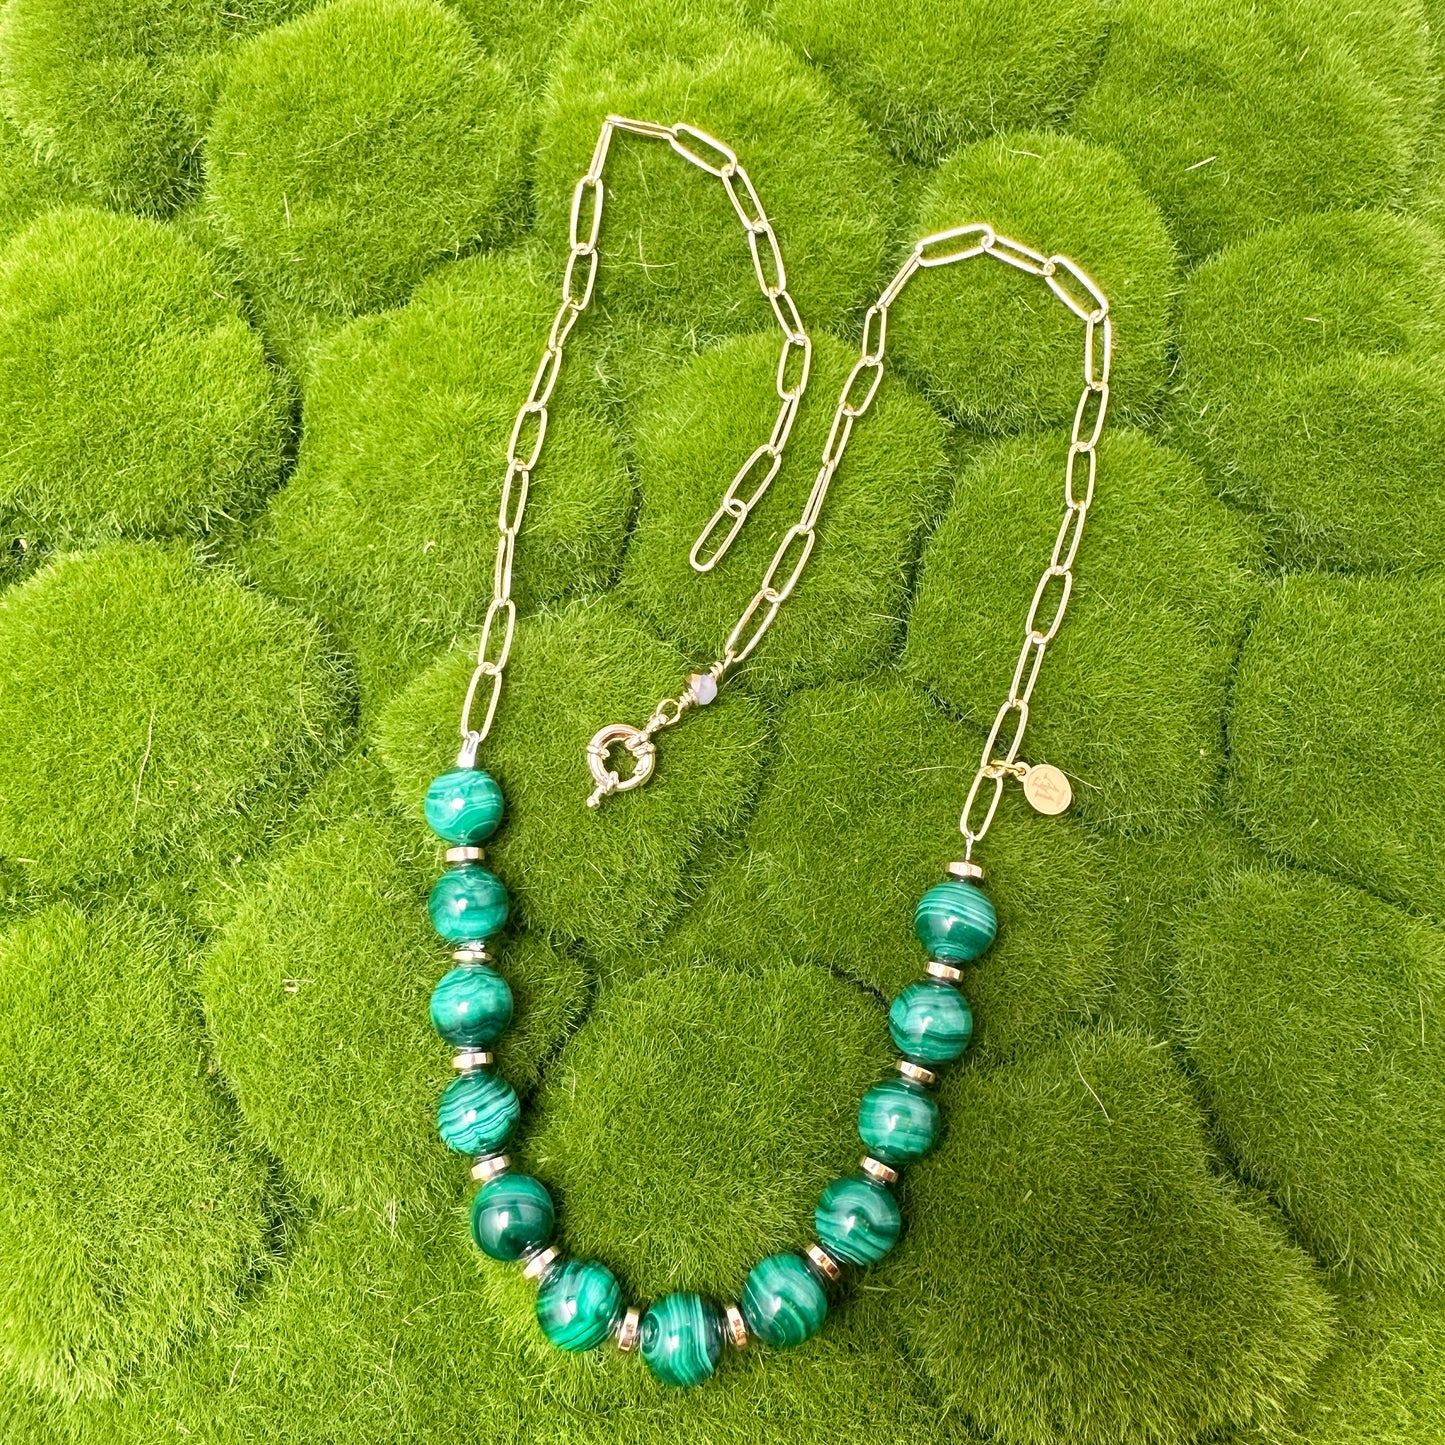 Malachite beads with stainless steel chain necklace 310-18 | Erika Williner Designs